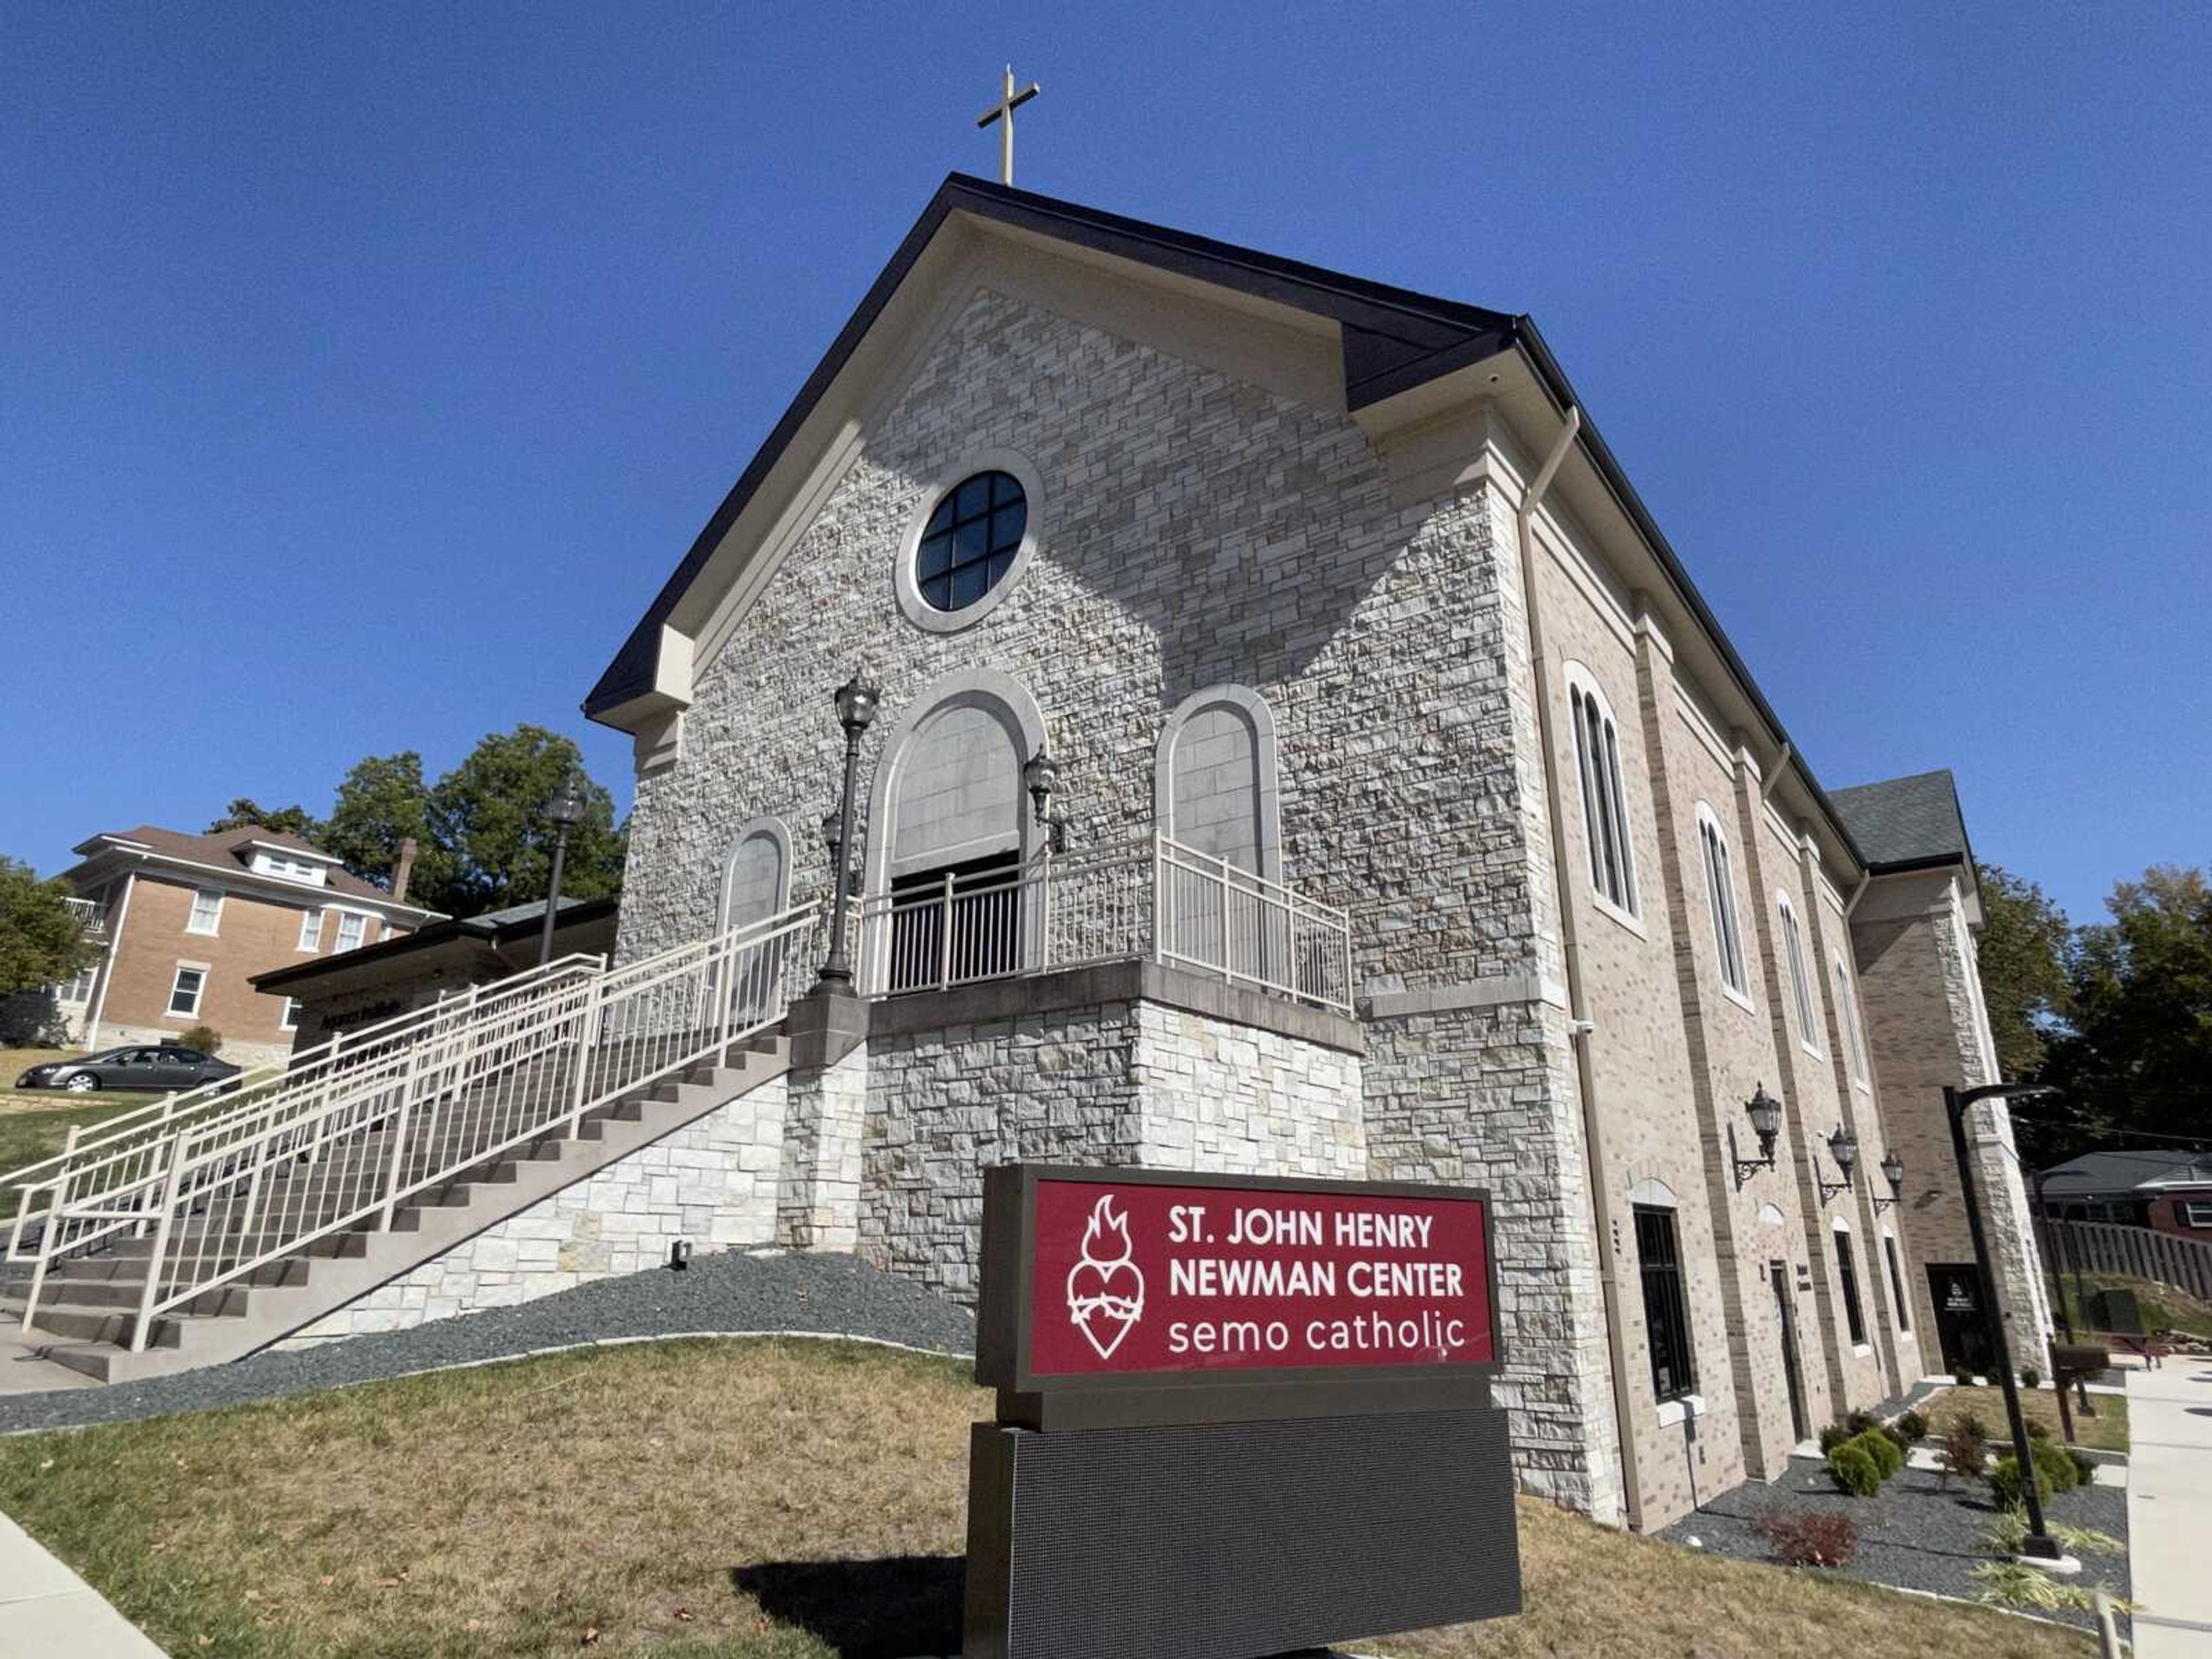 St. John Henry Newman Center Catholic Church was built on SEMO's campus in 2020. The Newman Center holds Catholic mass at noon on Tuesday, Wednesday and Thursday, and at 5:15 PM on Monday and Thursday. Students can attend bible study with other students to discuss their faith.